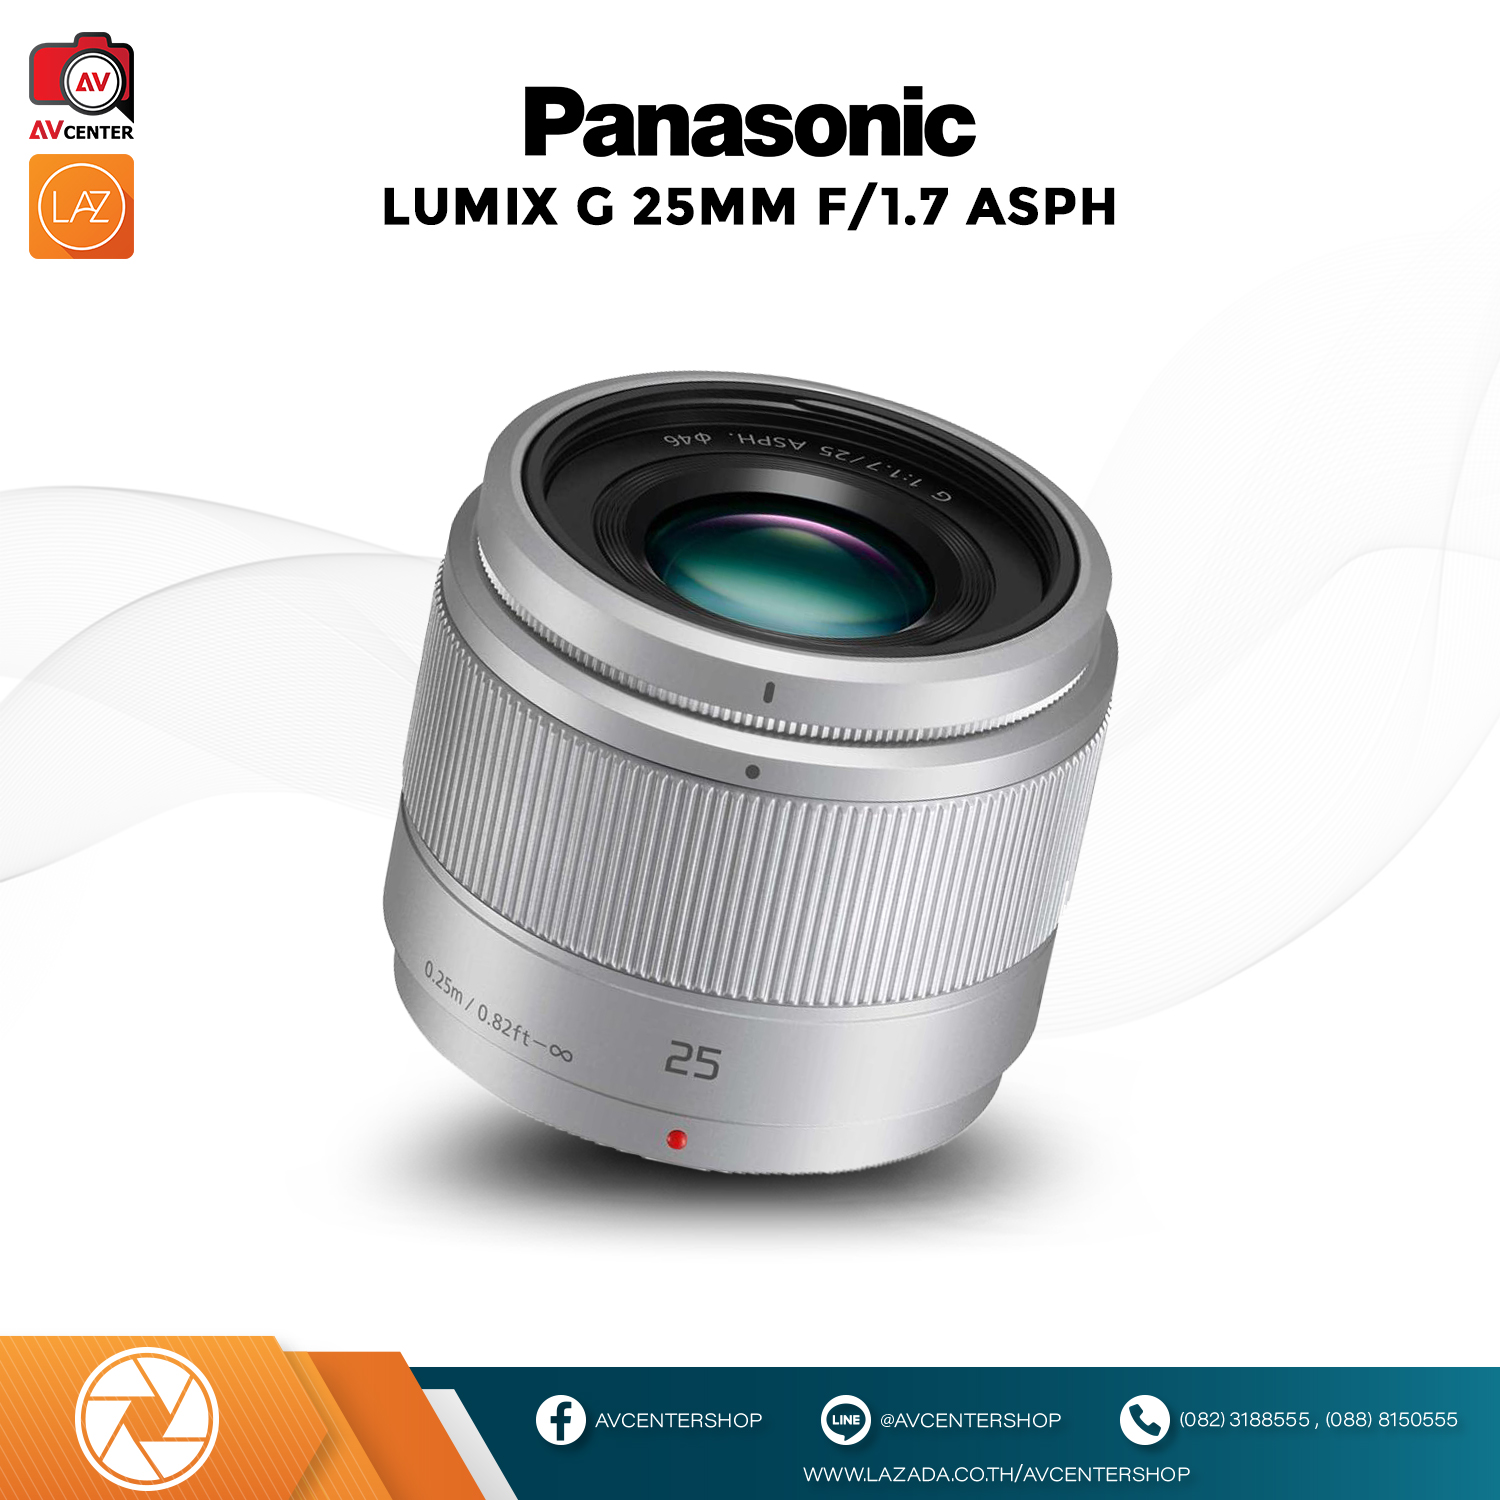 Panasonic Lumix G 25mm F1.7 Asph (รับประกัน 1ปี By AVcentershop)